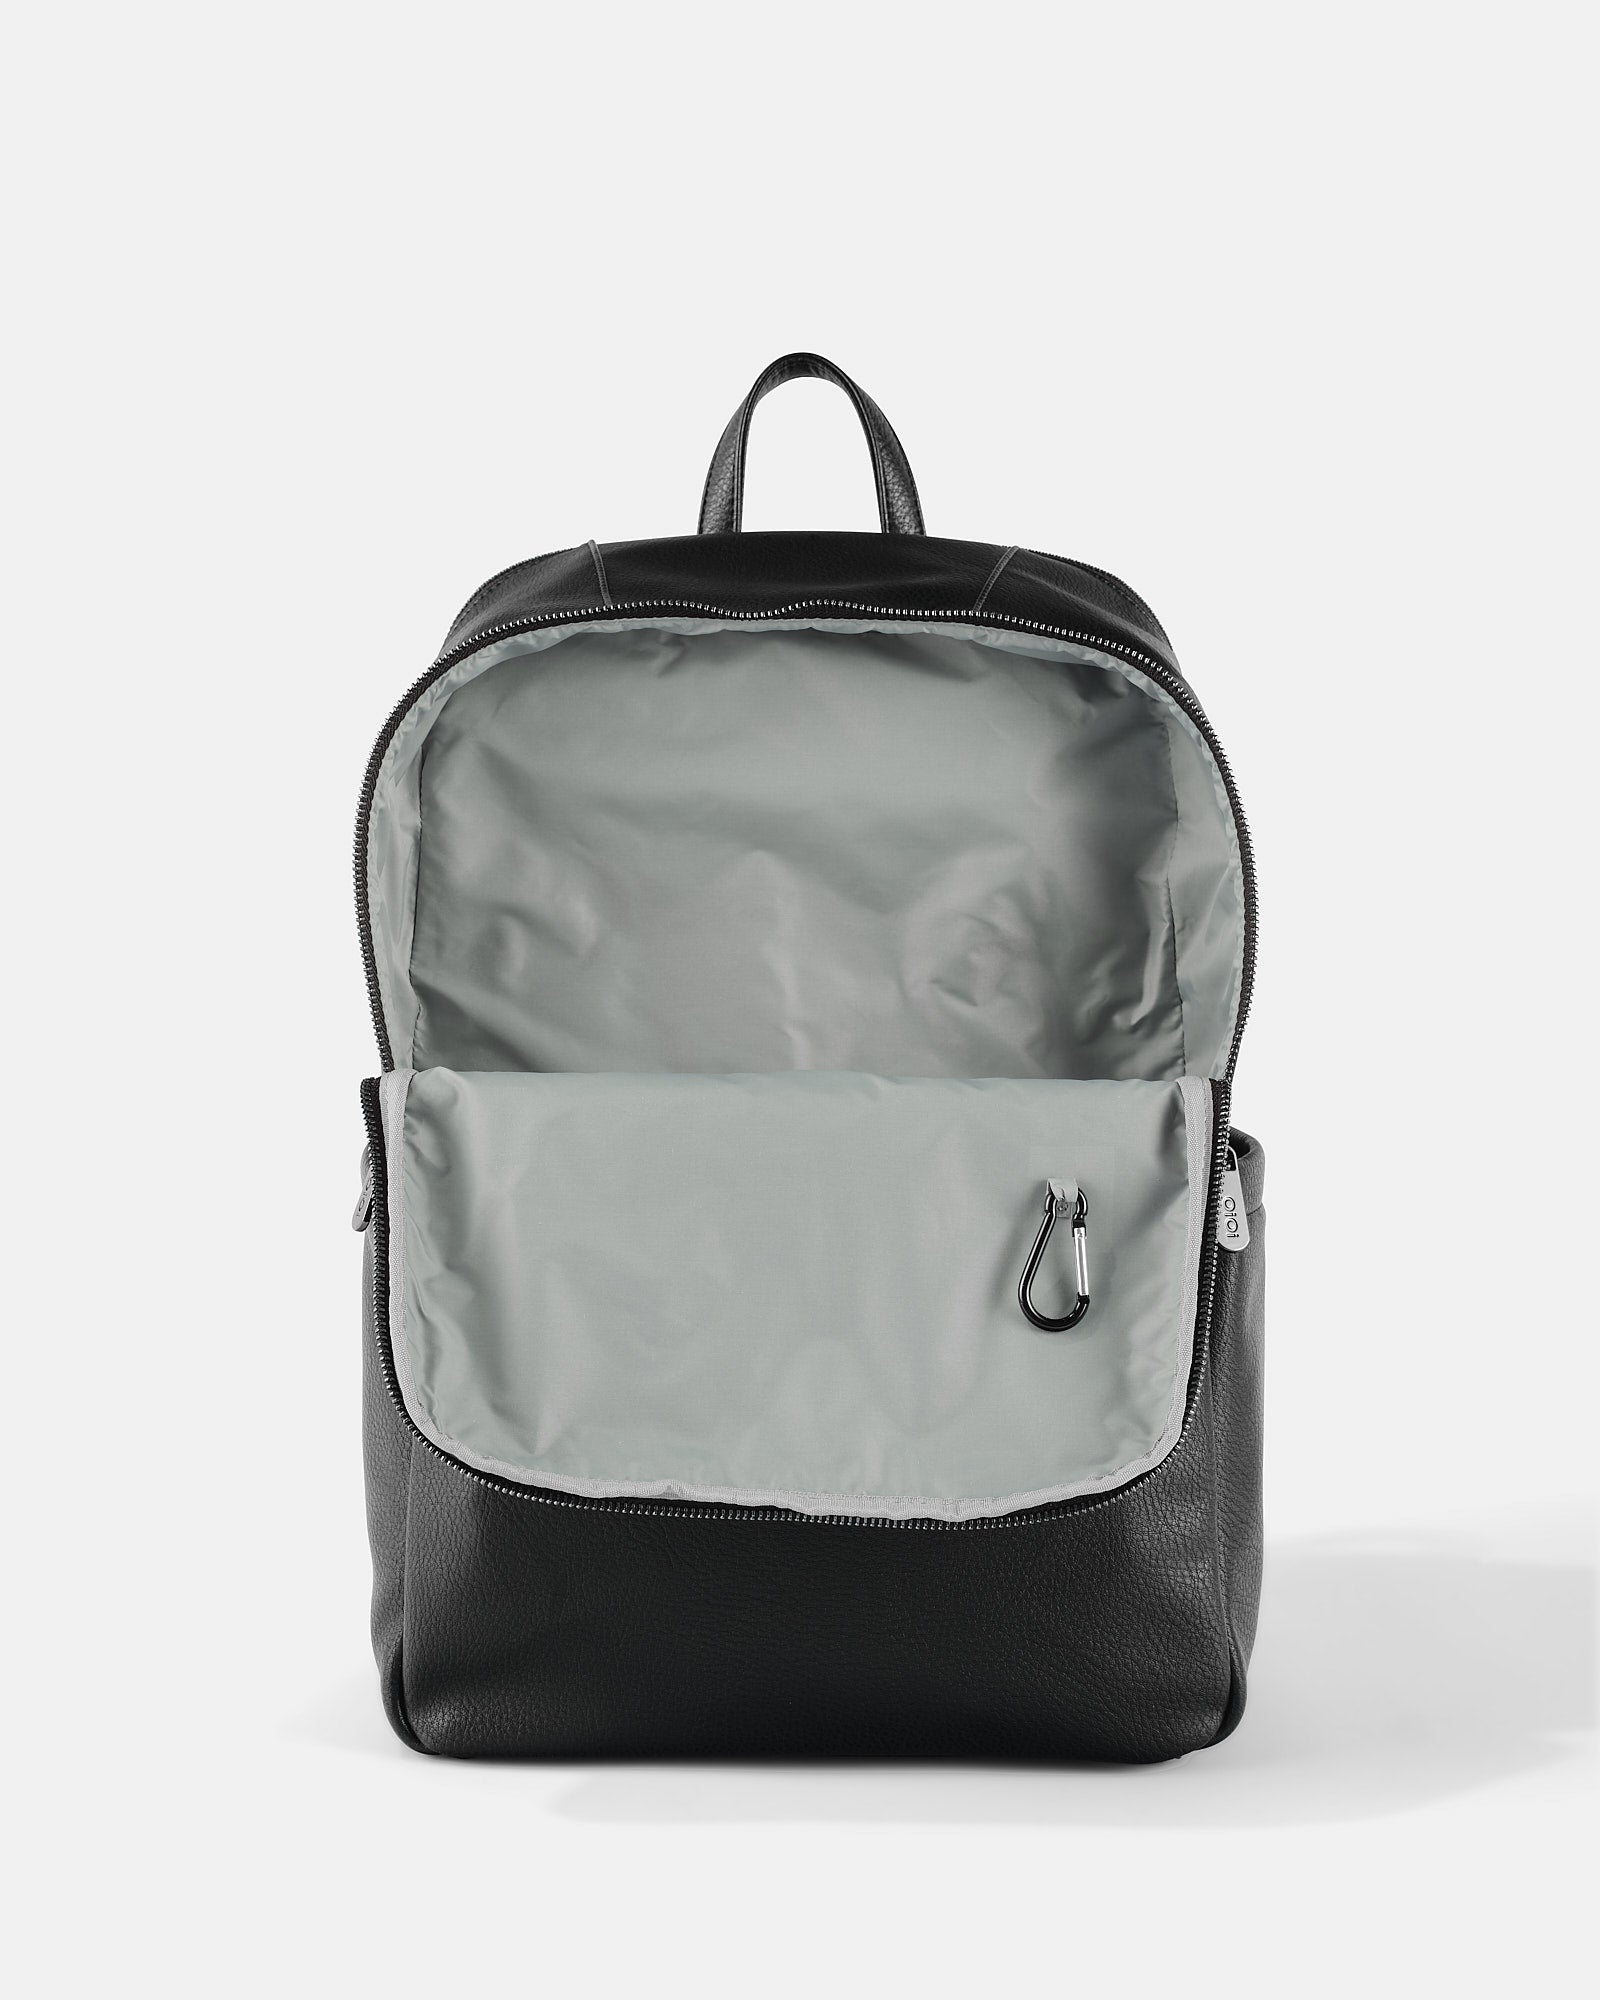 OiOi Multitasker Nappy Backpack Black Faux Leather